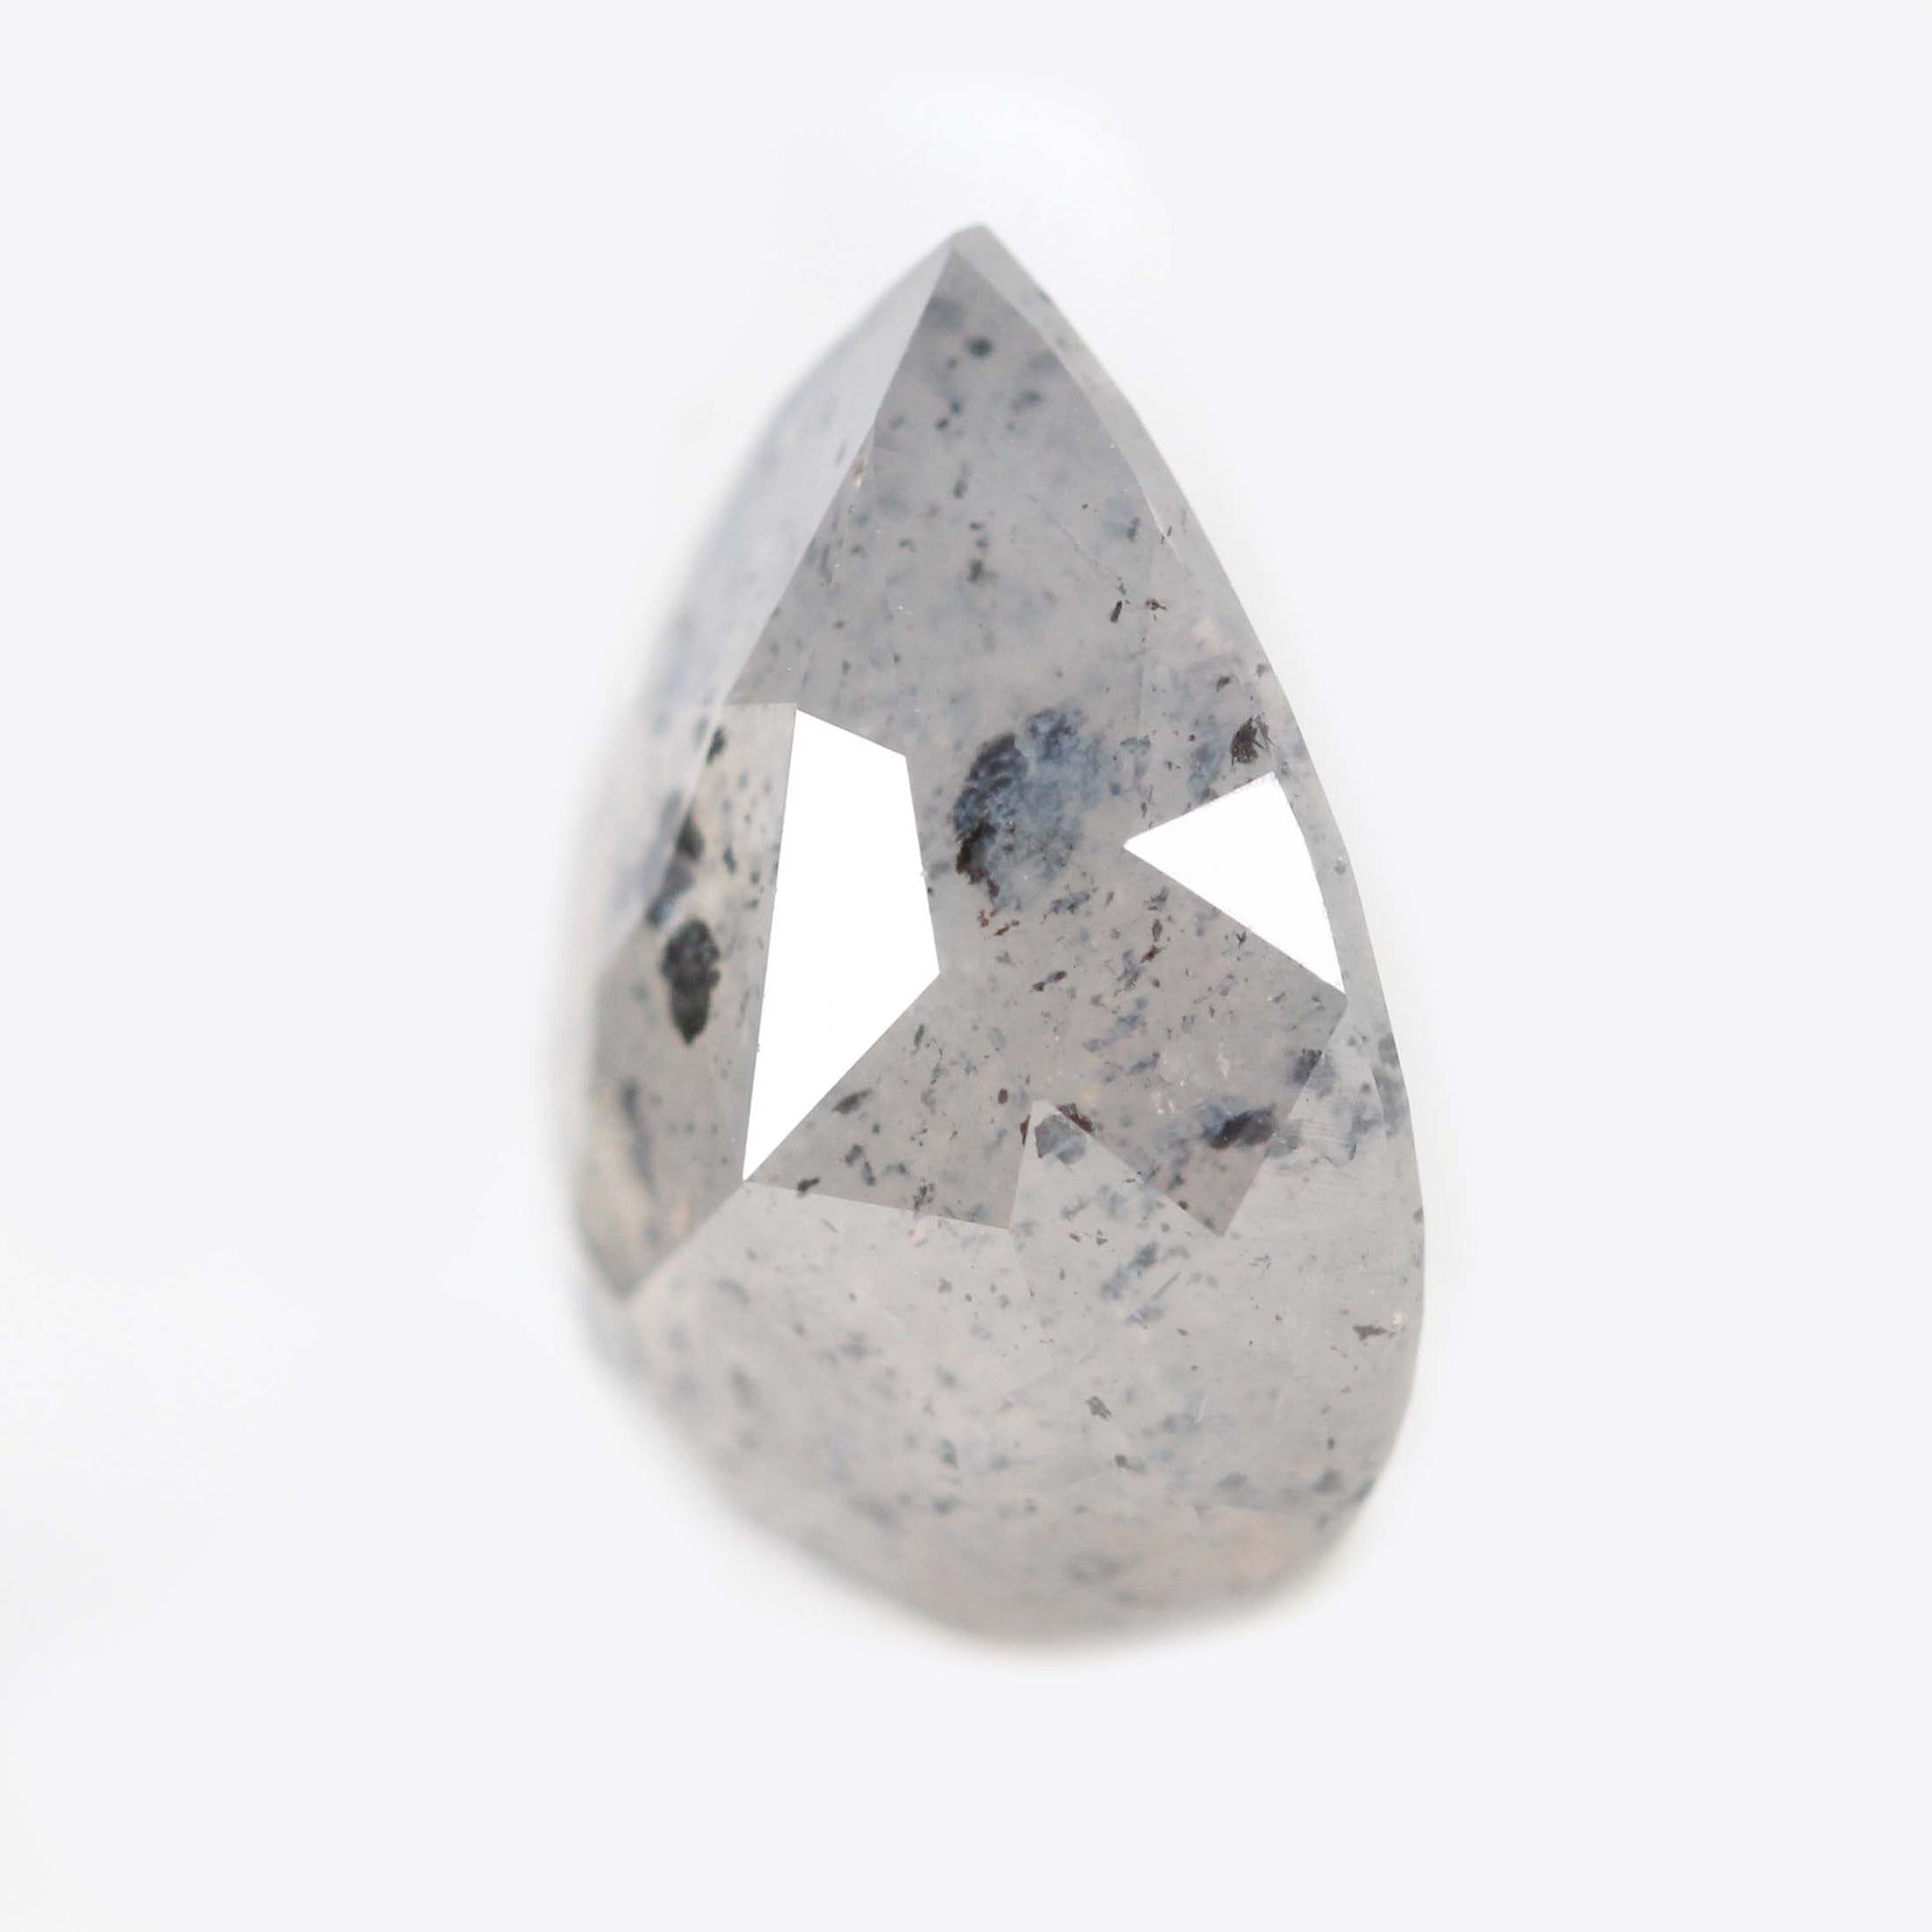 2.57 Carat Stormy Gray Pear Celestial Diamond for Custom Work - Inventory Code SGP257 - Midwinter Co. Alternative Bridal Rings and Modern Fine Jewelry